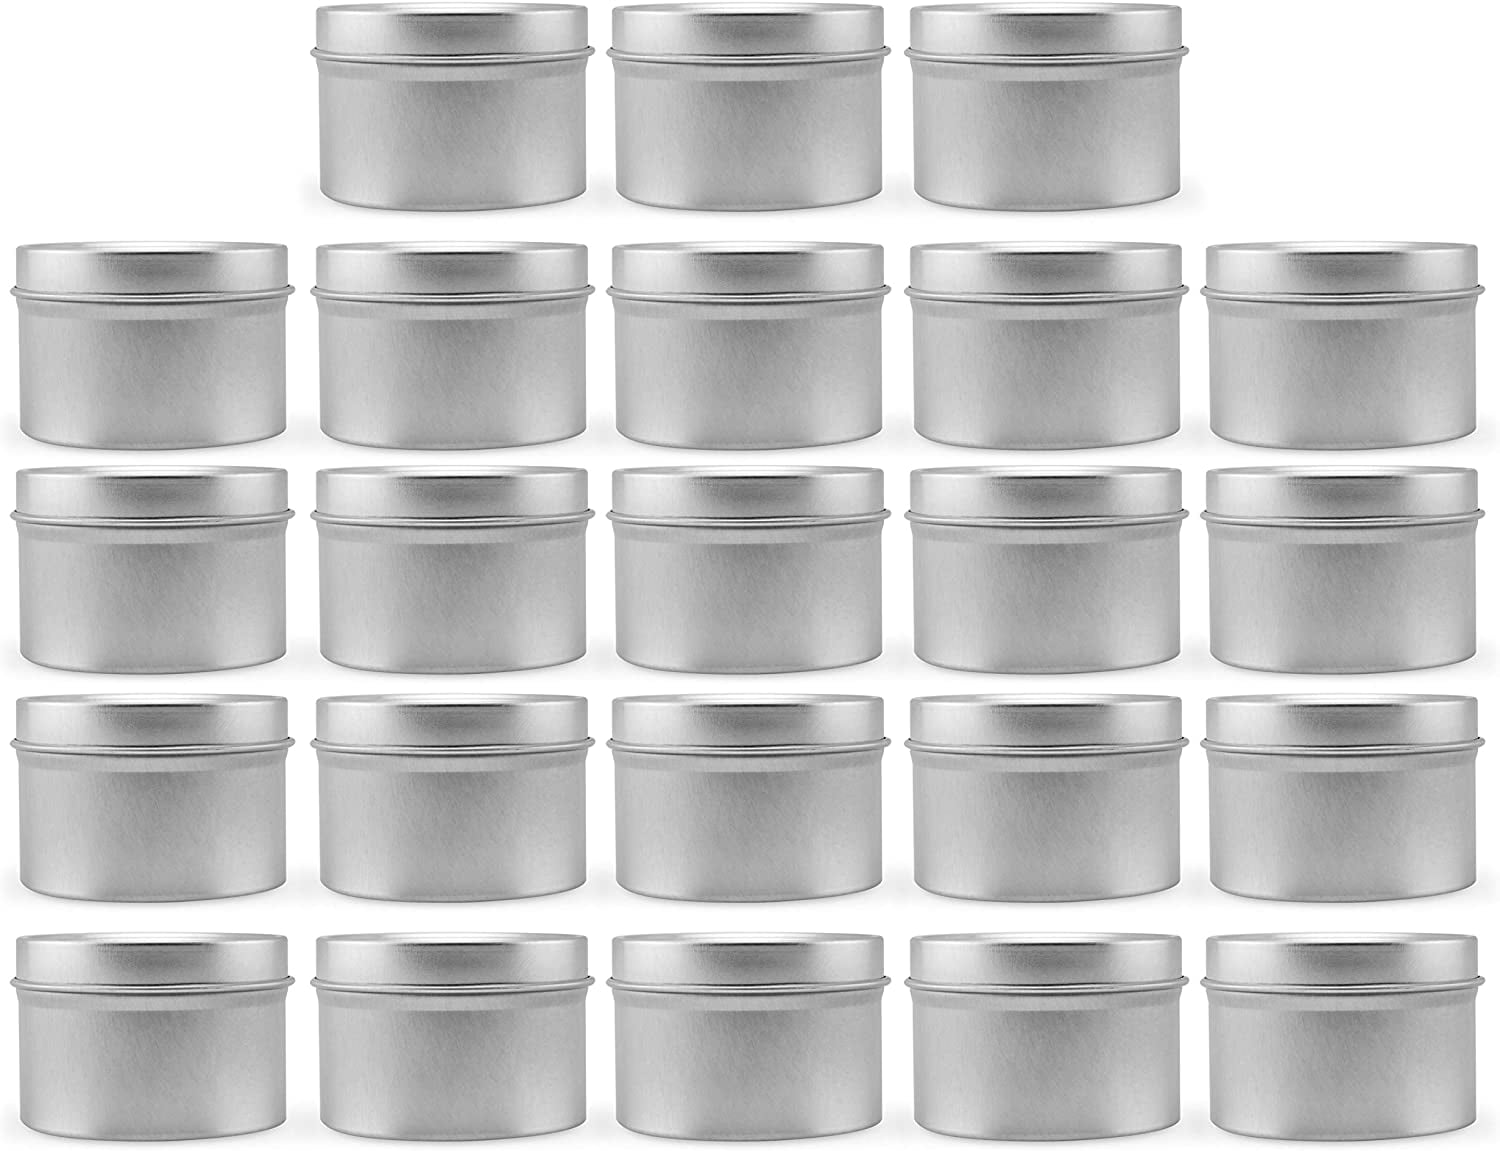 24 Pack Candle Tins 4 Oz Metal Round Tins Candy Tins DIY Making Candle Storage Containers Travel Tins with Lids for Candle Making Gifts,Food Arts & Crafts,Spicese 